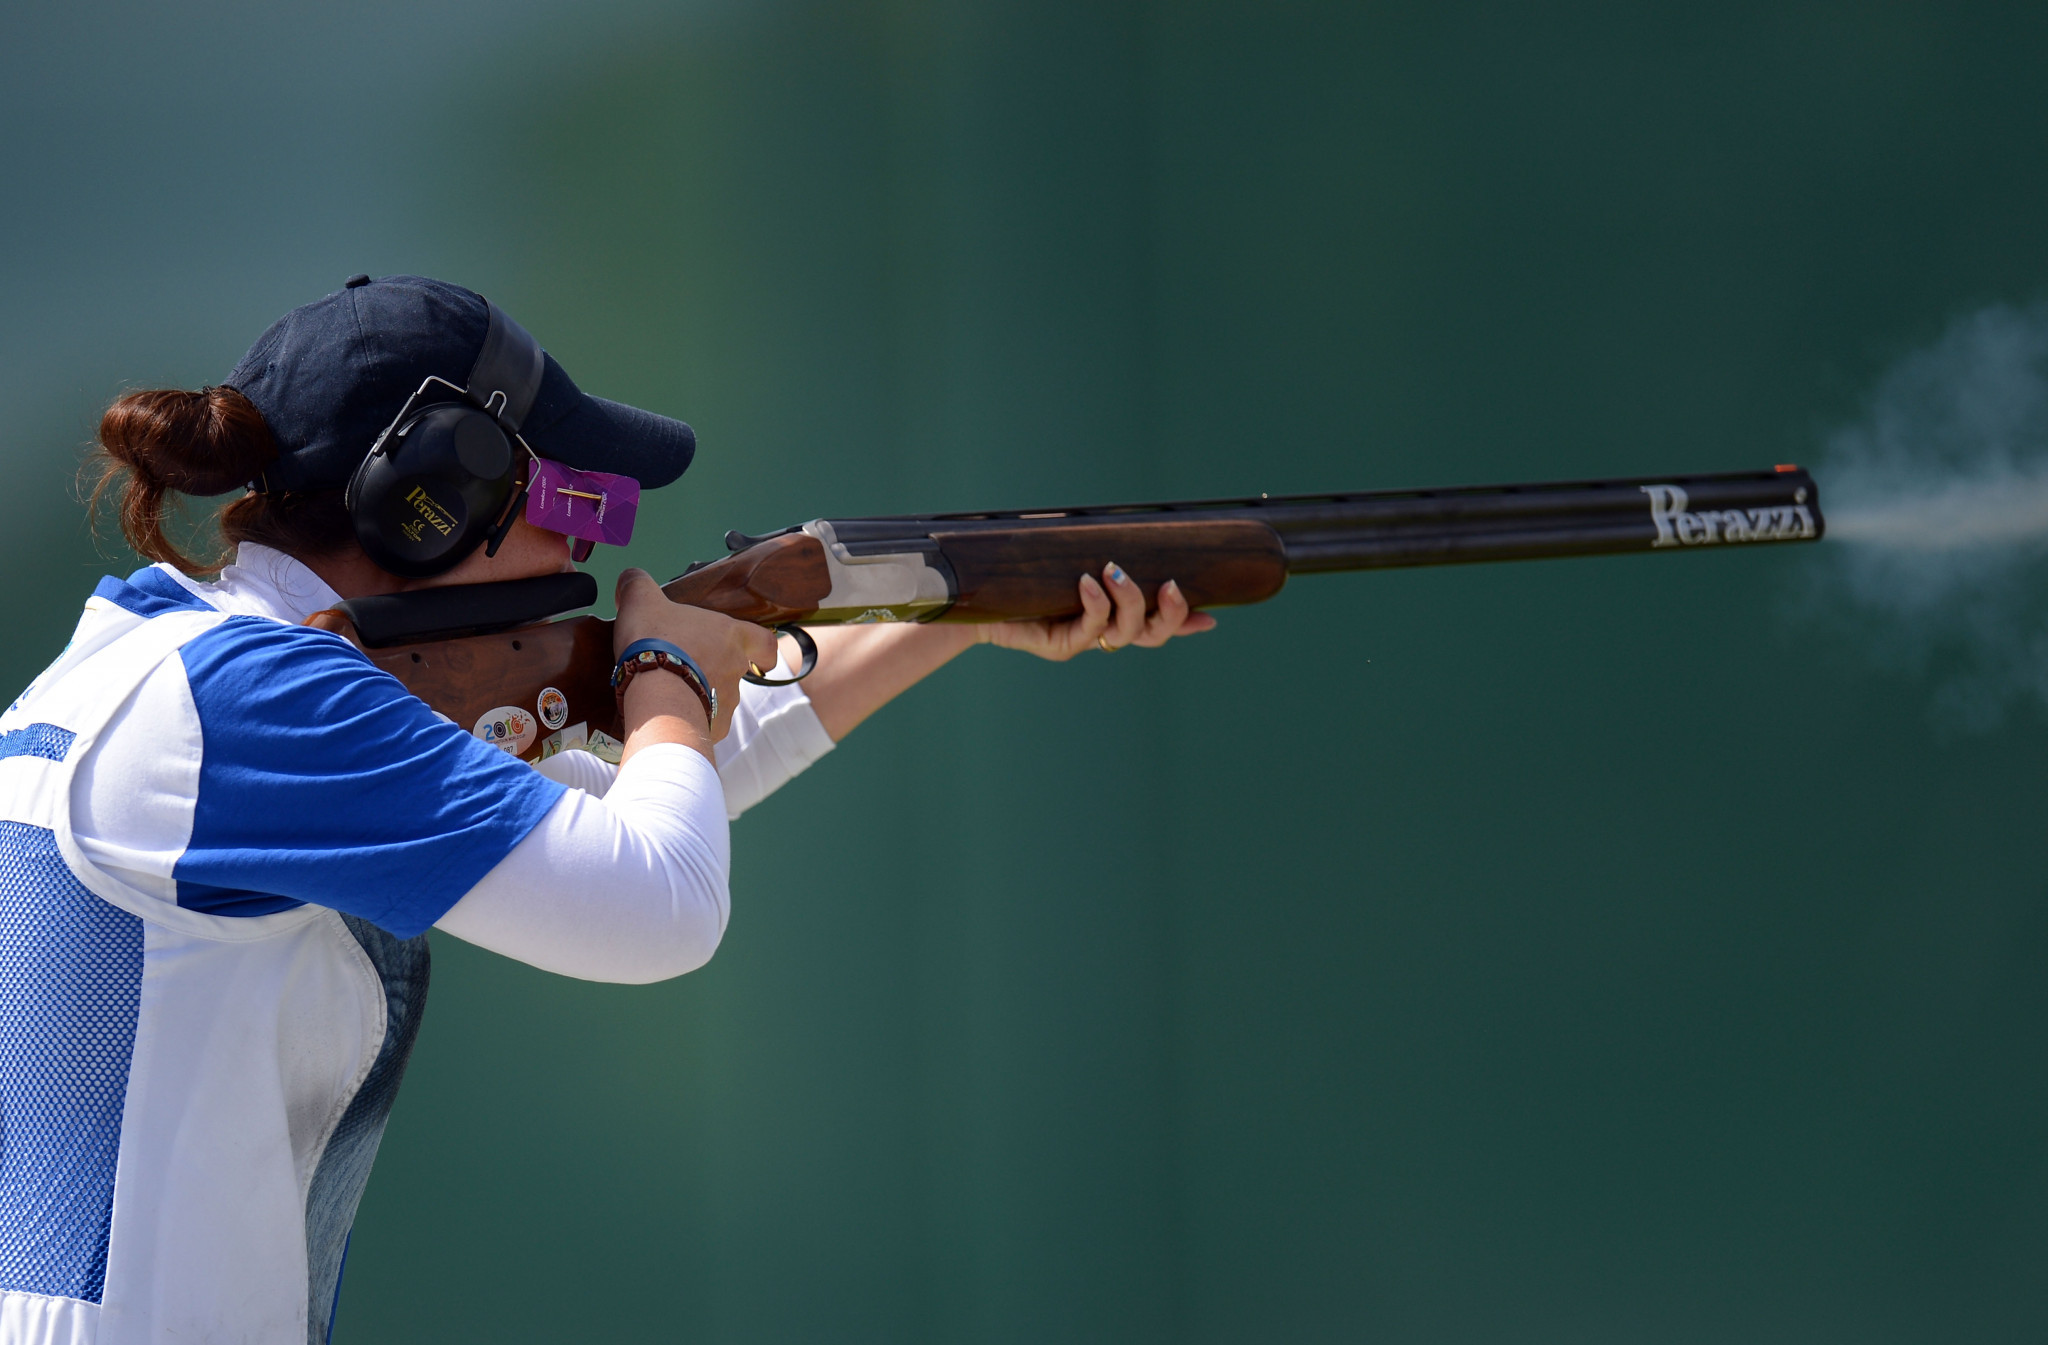 Alessandra Perilli was the silver medallist in the women's trap event ©Getty Images